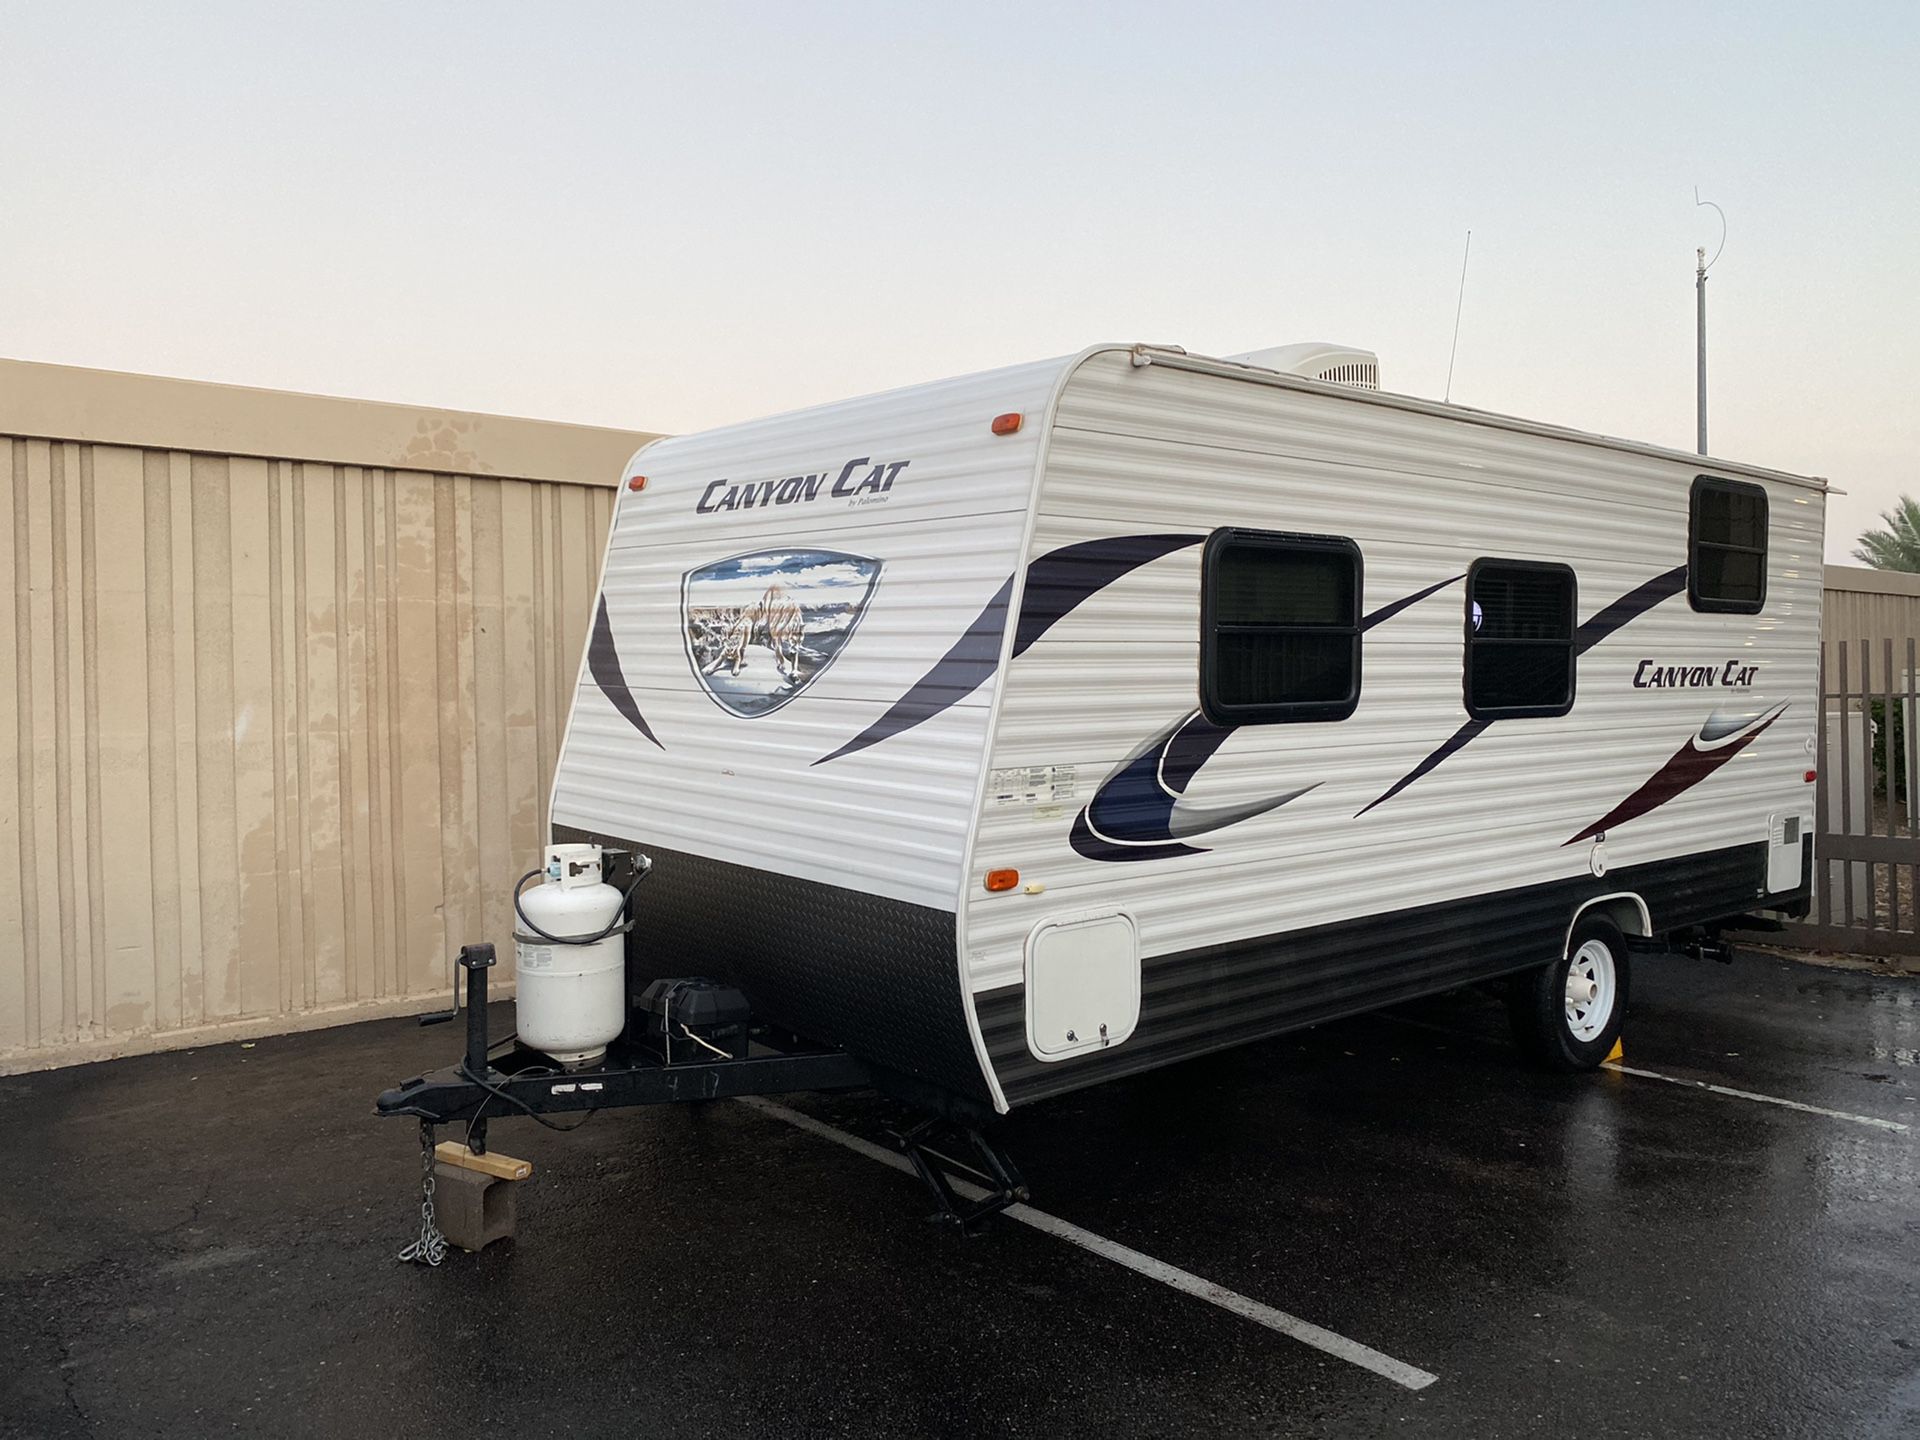 2014 forest river canyon cat original owner bunkhouse